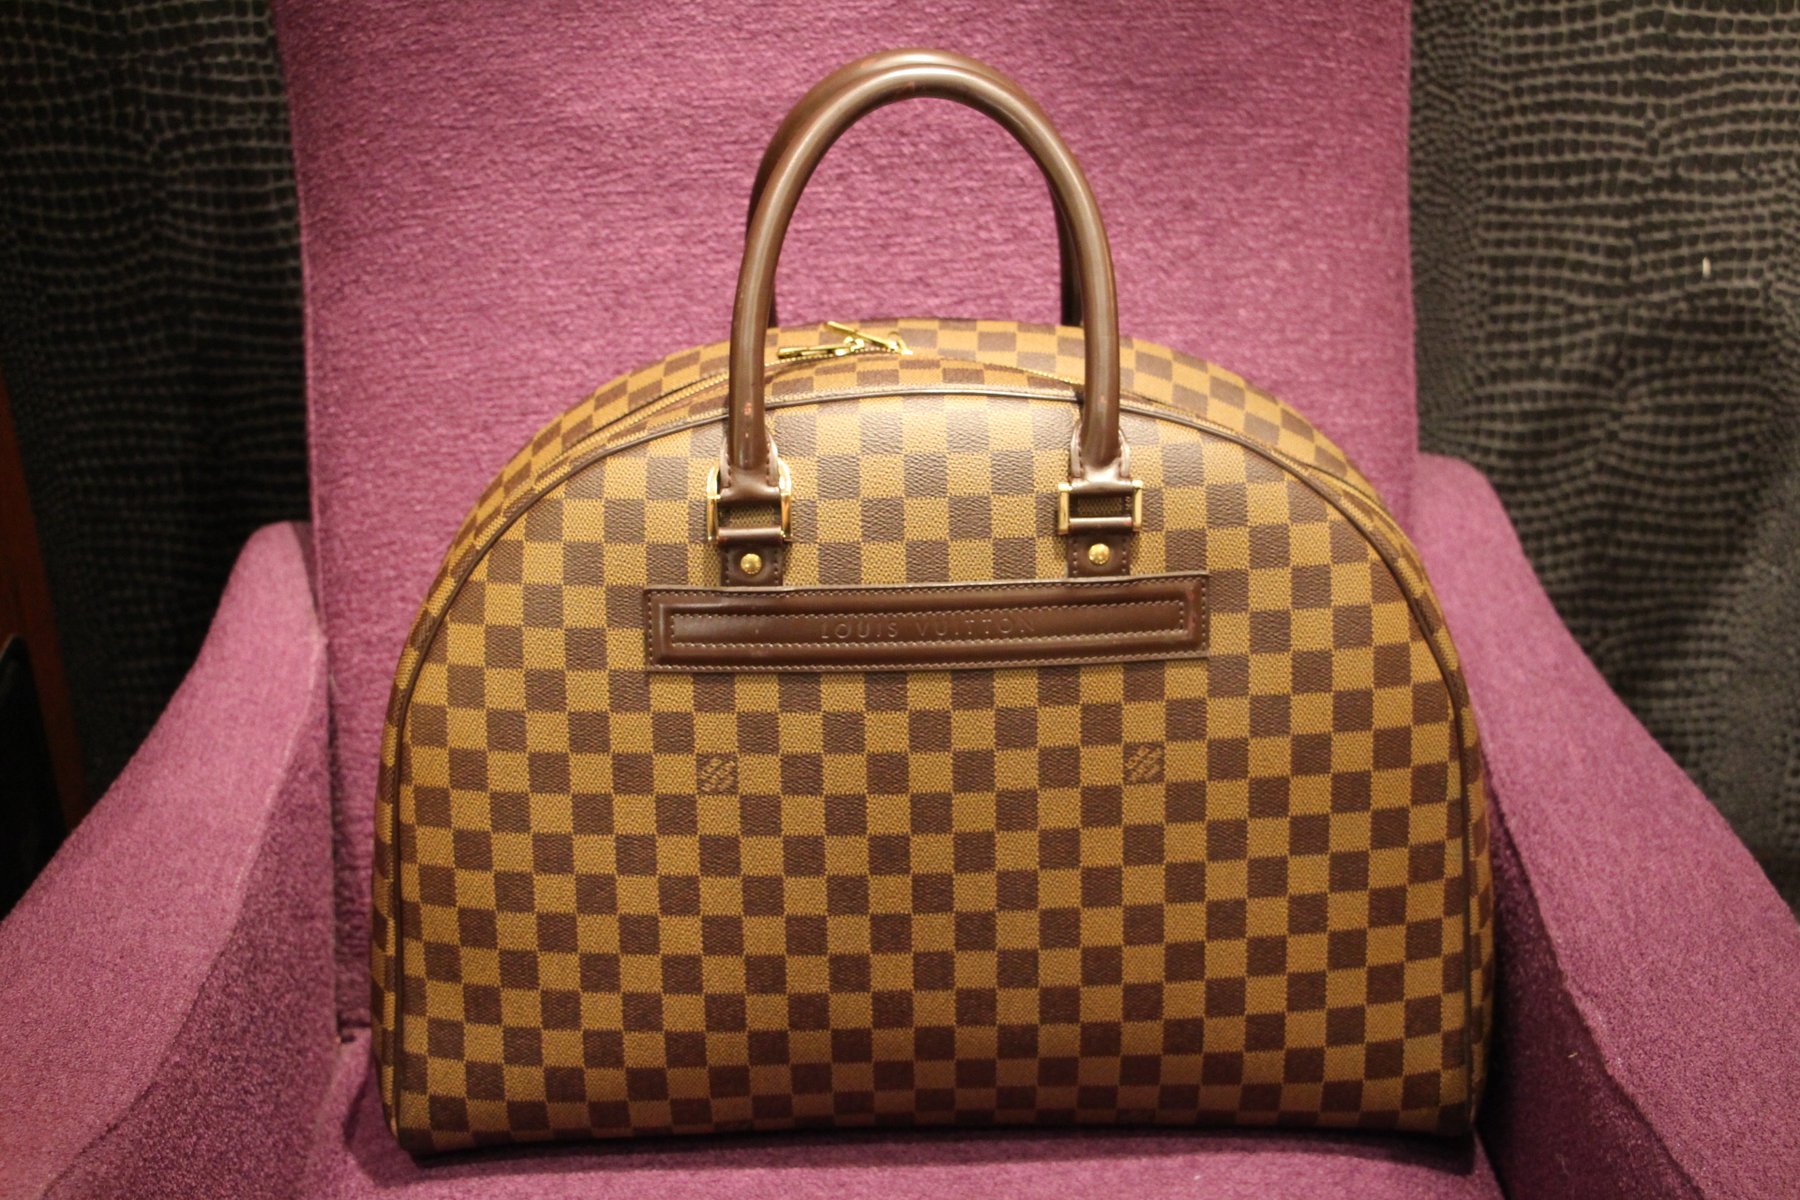 Damier Pattern Travel Bag from Louis Vuitton, 1980s for sale at Pamono